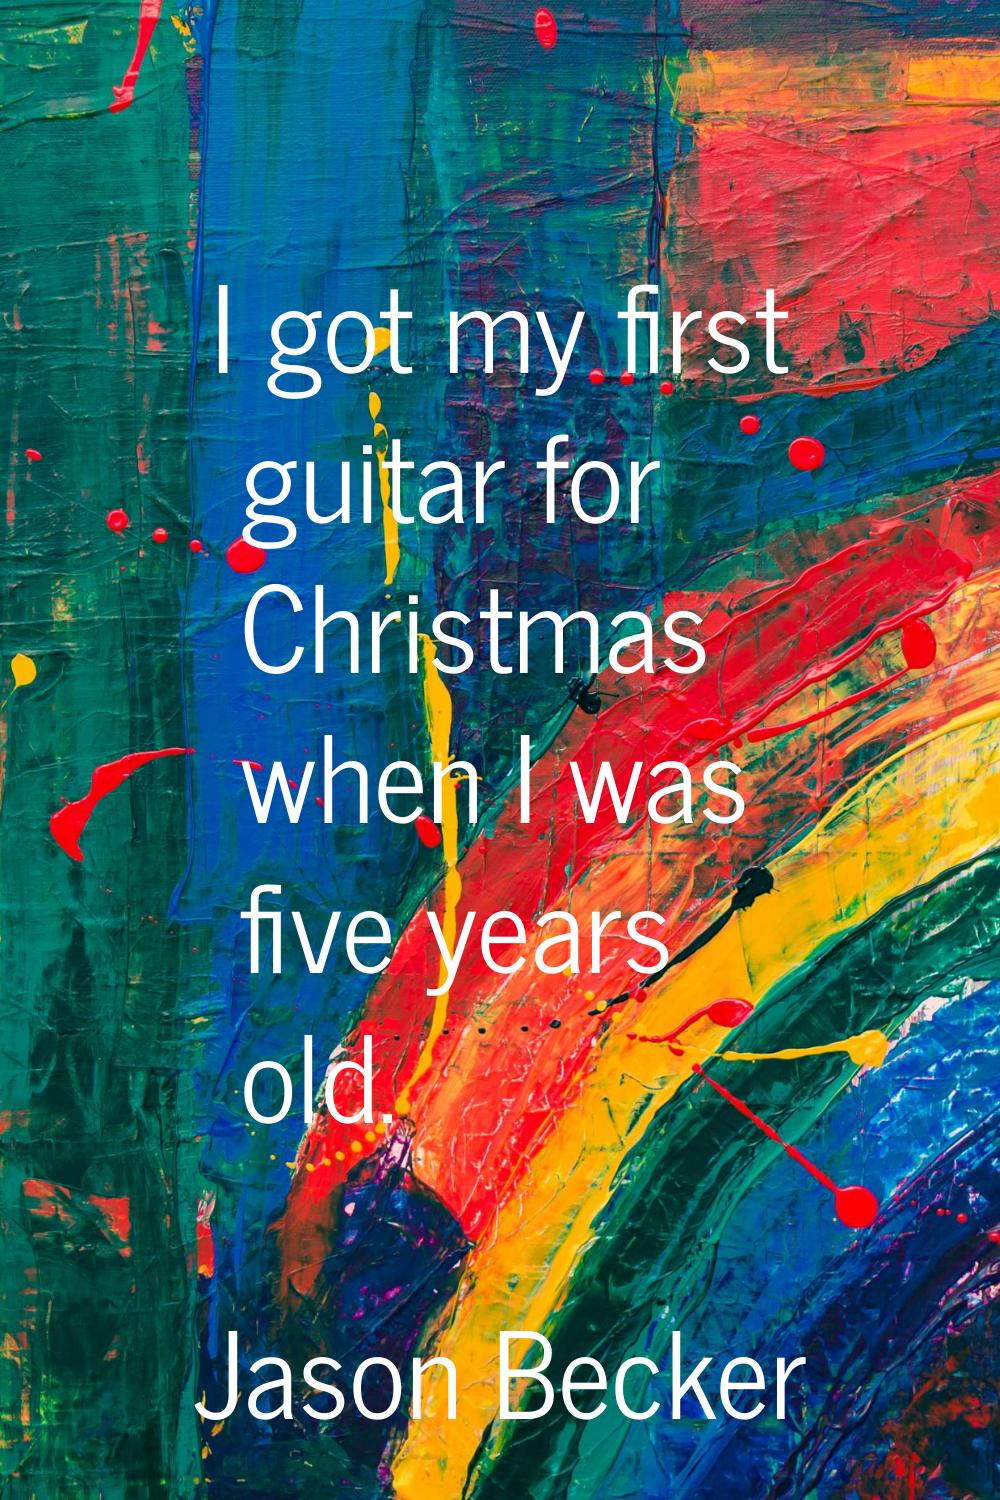 I got my first guitar for Christmas when I was five years old.